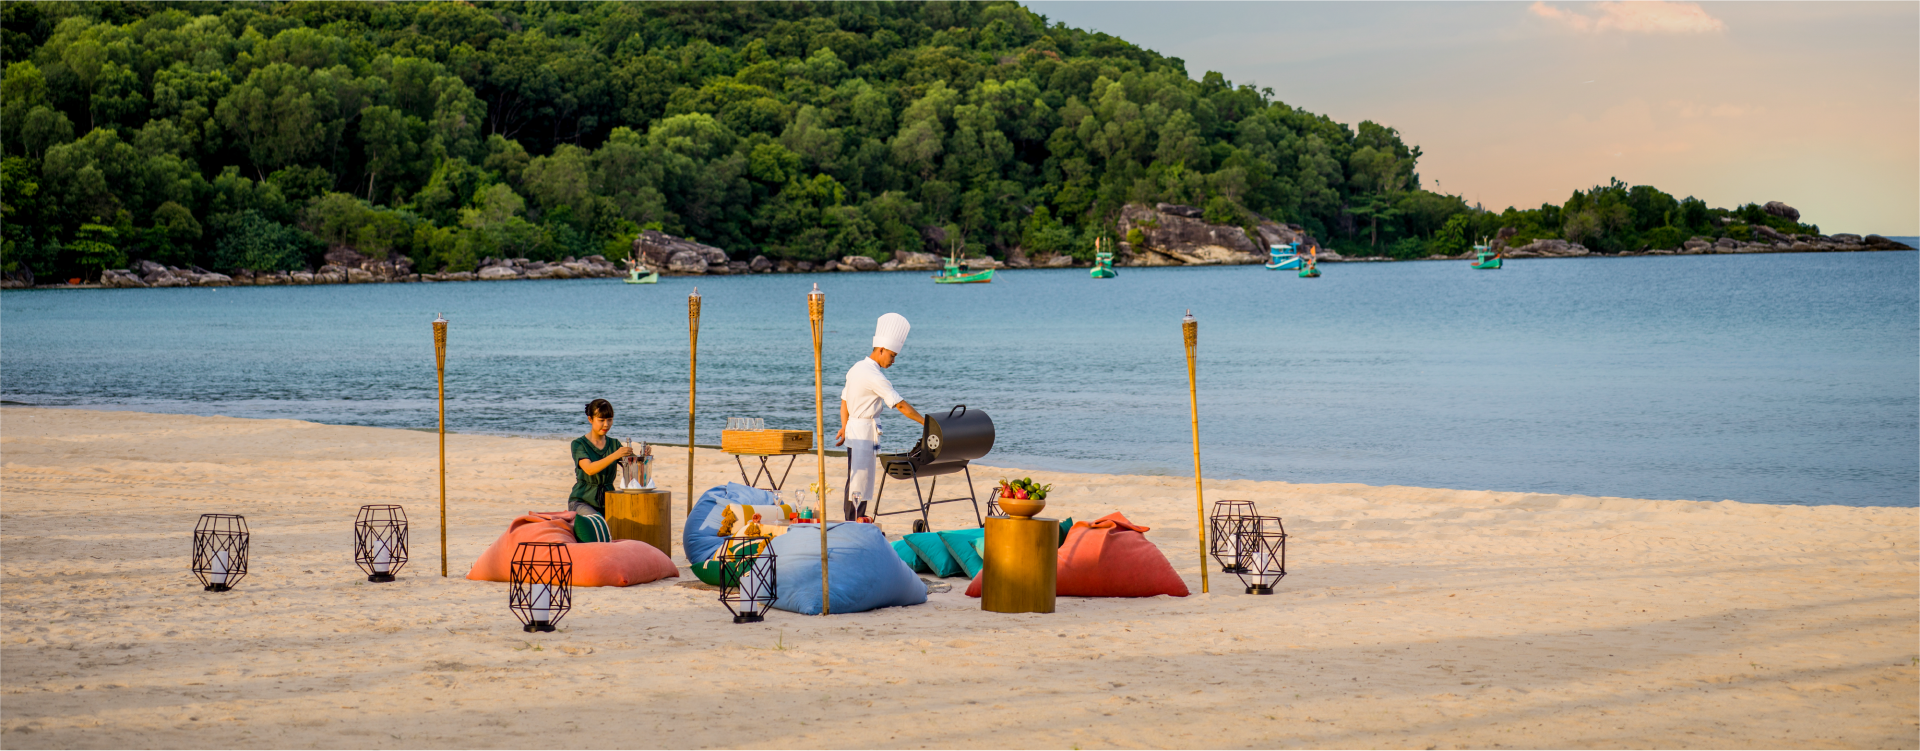 a man in a white chef hat tends to a barbecue next to the ocean while a woman decorates a small sitting table at the New World Phu Quoc Resort in Vietnam